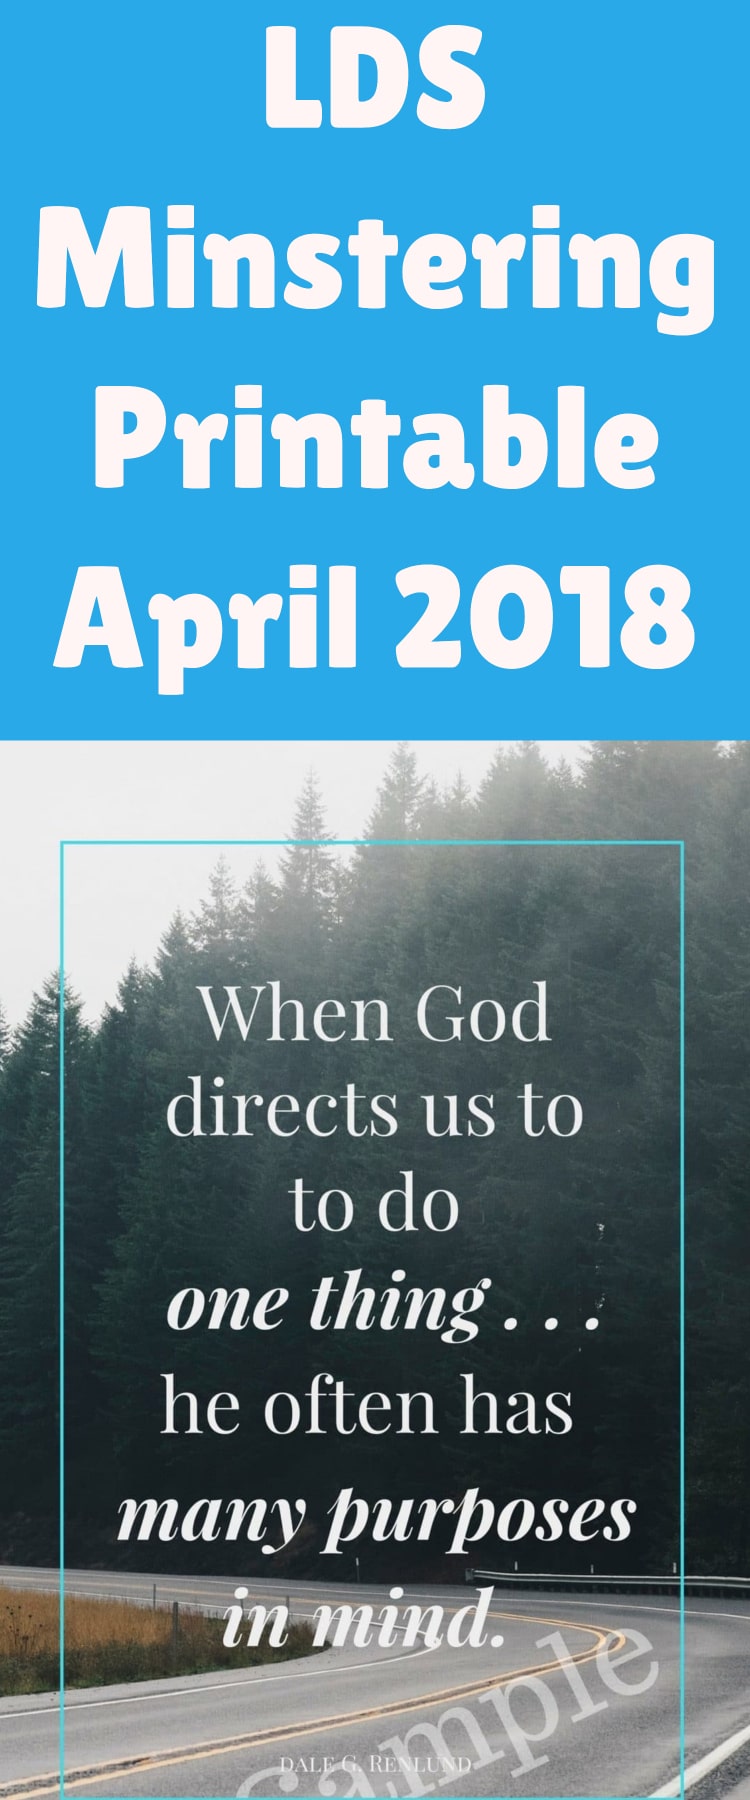 April 2018 LDS Ministering Printable   My Thoughts Clarks Condensed